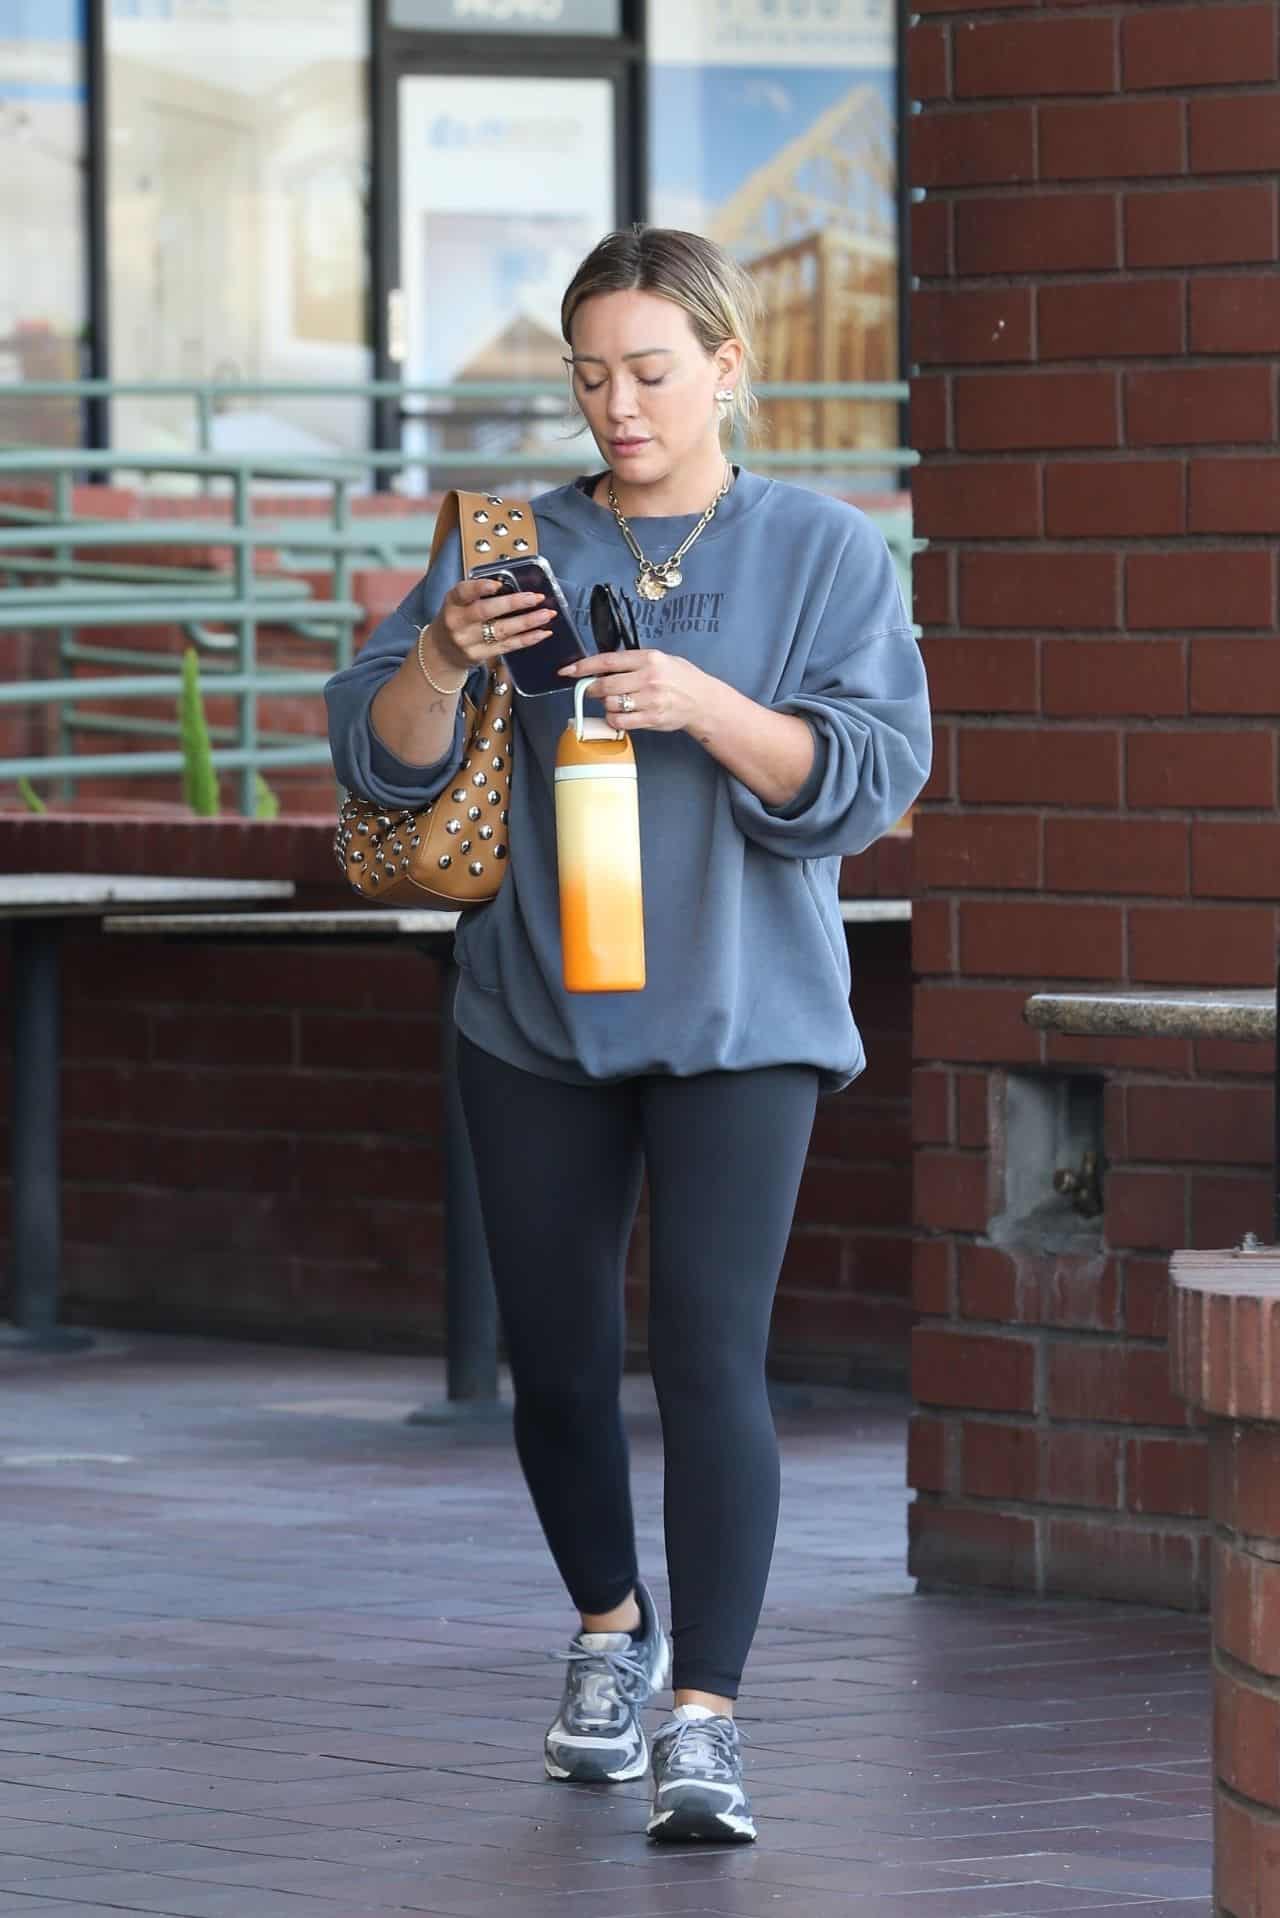 Hilary Duff Shows Off Her Effortlessly Chic Grocery Shopping Style